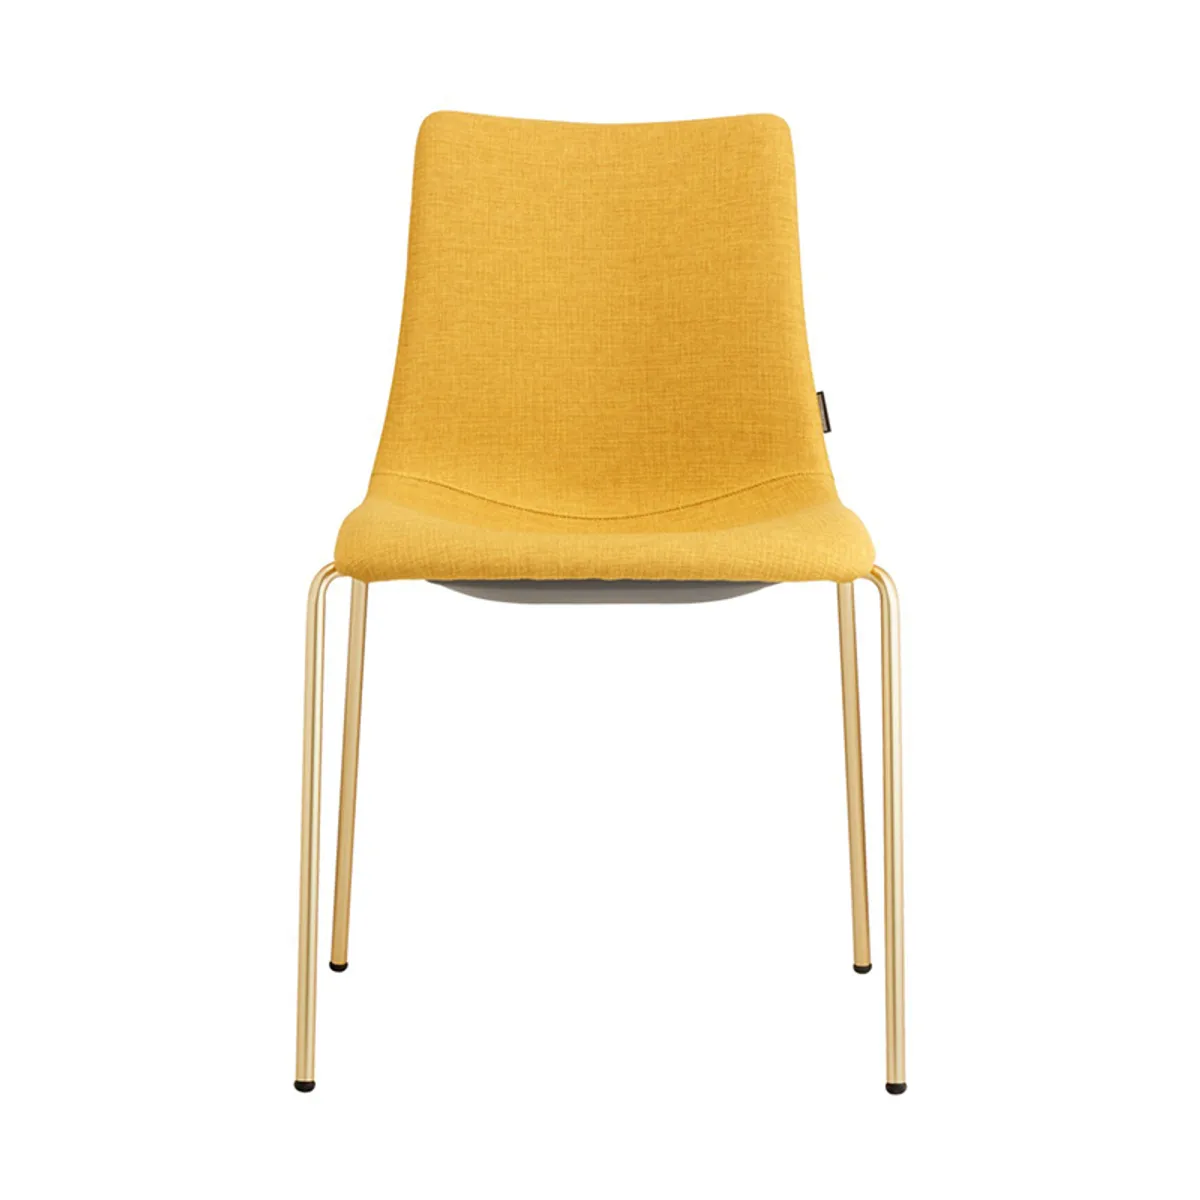 Selina Side Chair With Metal Legs And Yellow Upholstery Stacking Chair For Cafes By Insideoutcontracts 090